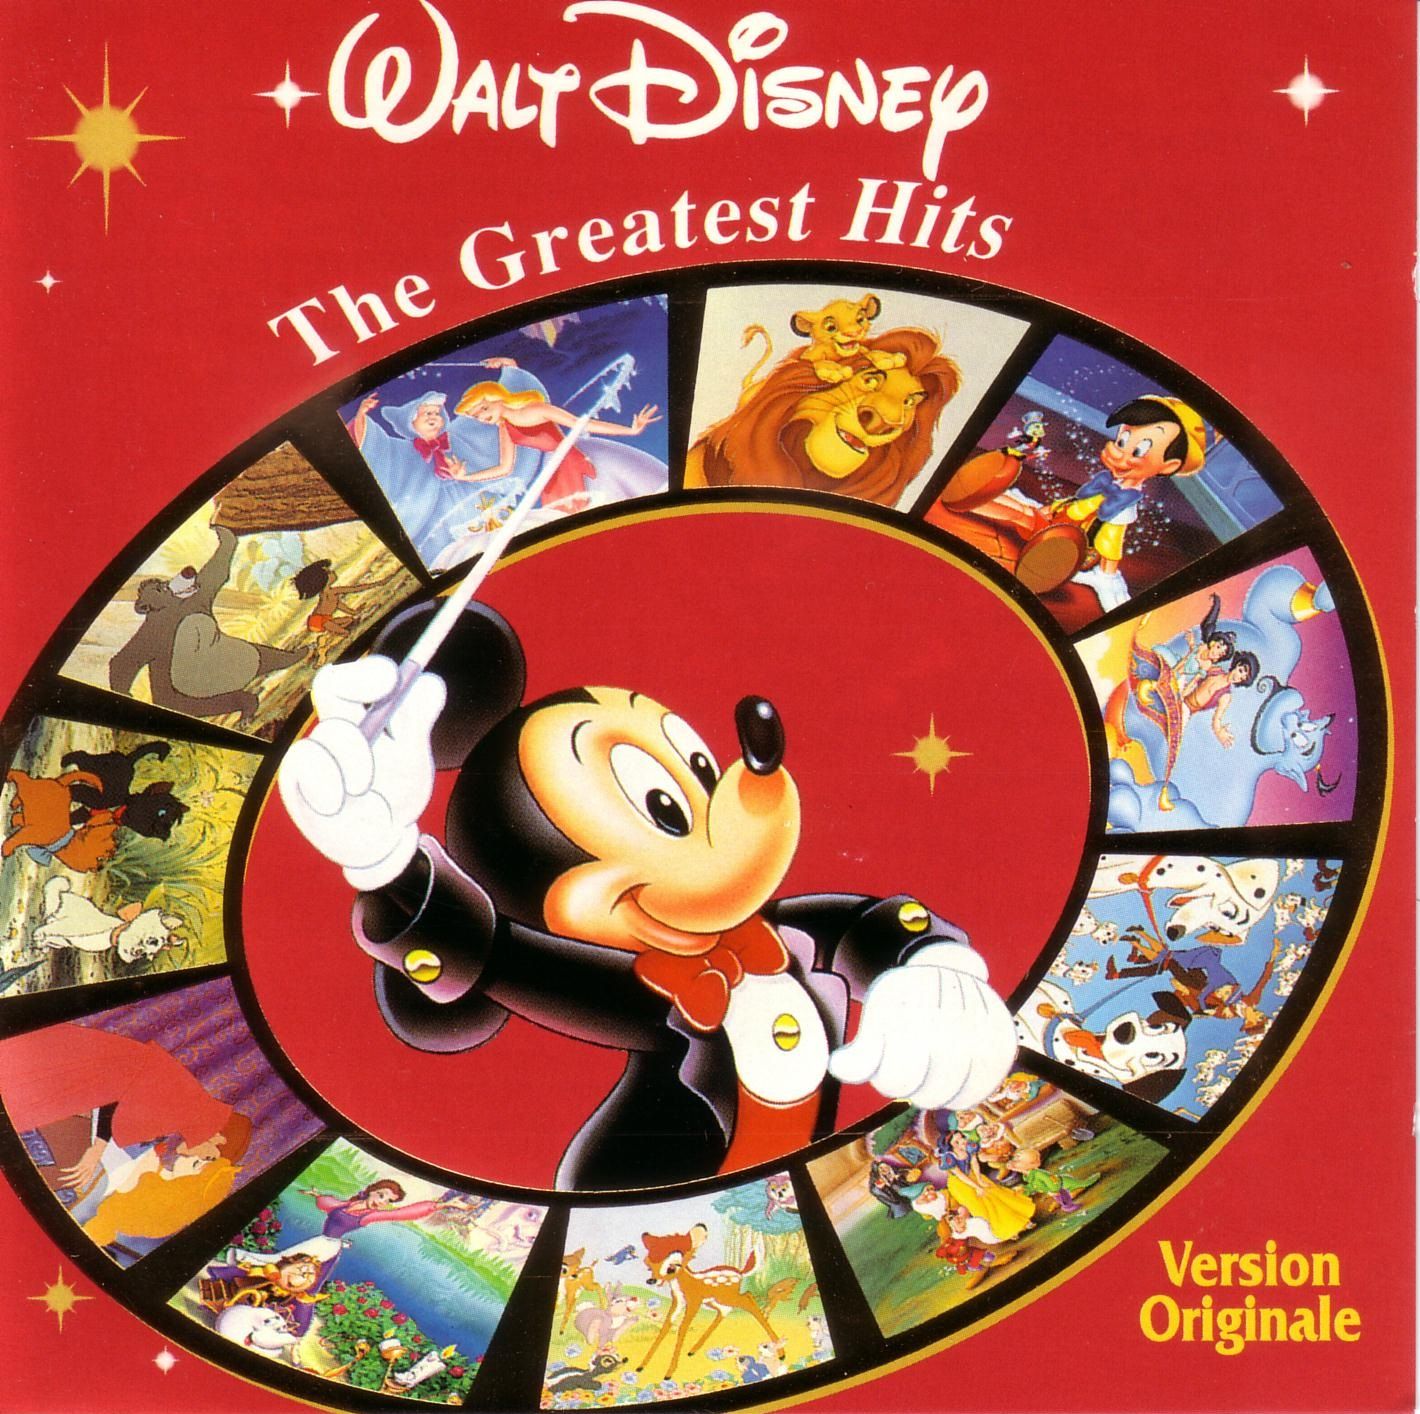 Walt Disney The Gre Disney Cd Covers Cover Century Over 1 000 000 Album Art Covers For Free